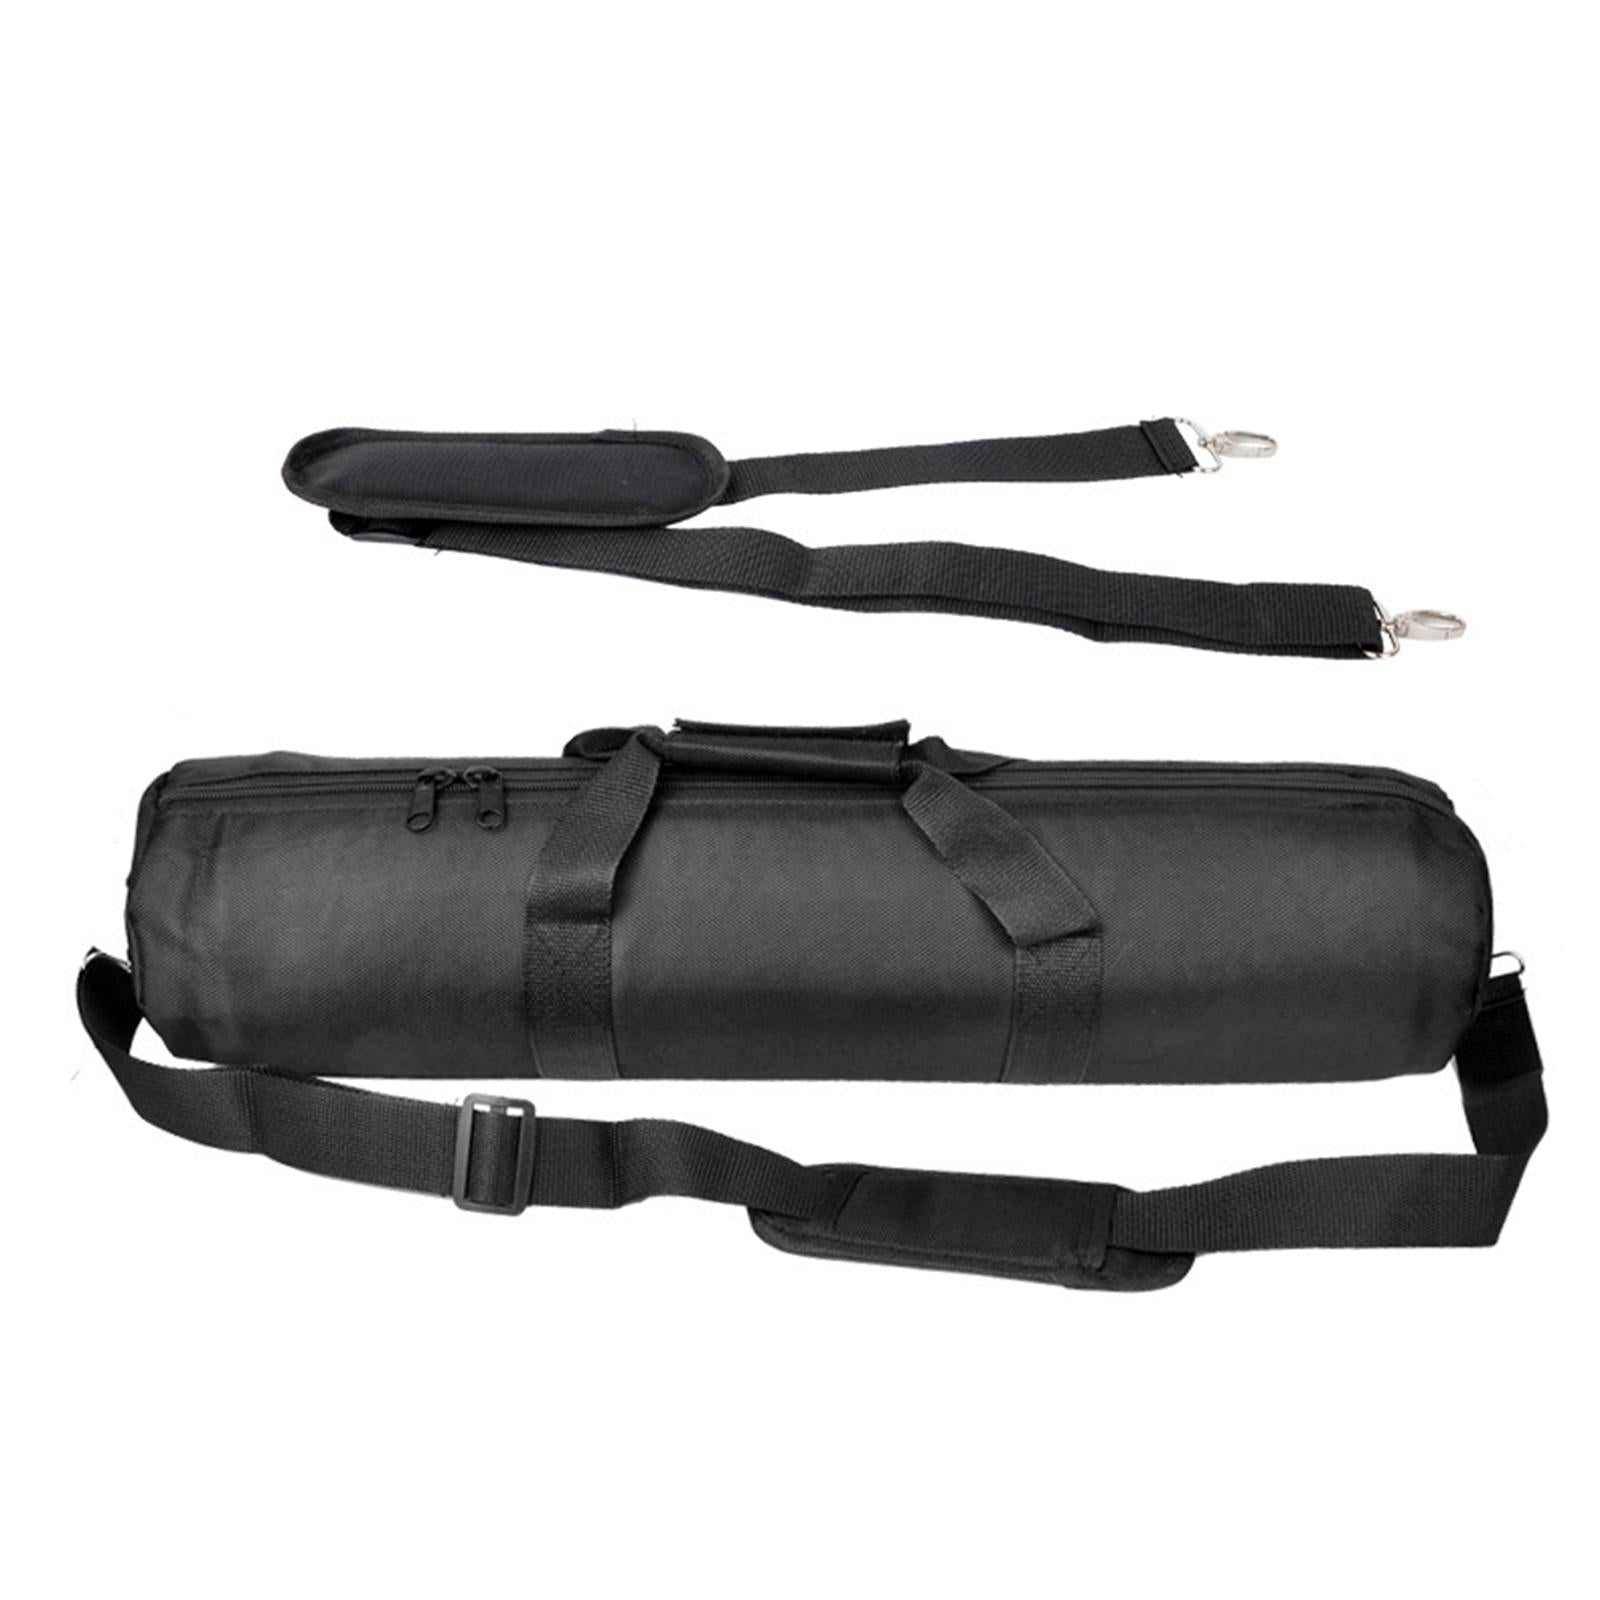 Tripod Carrying Bag Heavy Duty Multi Function Dual Use Outdoor for Umbrella 90cm